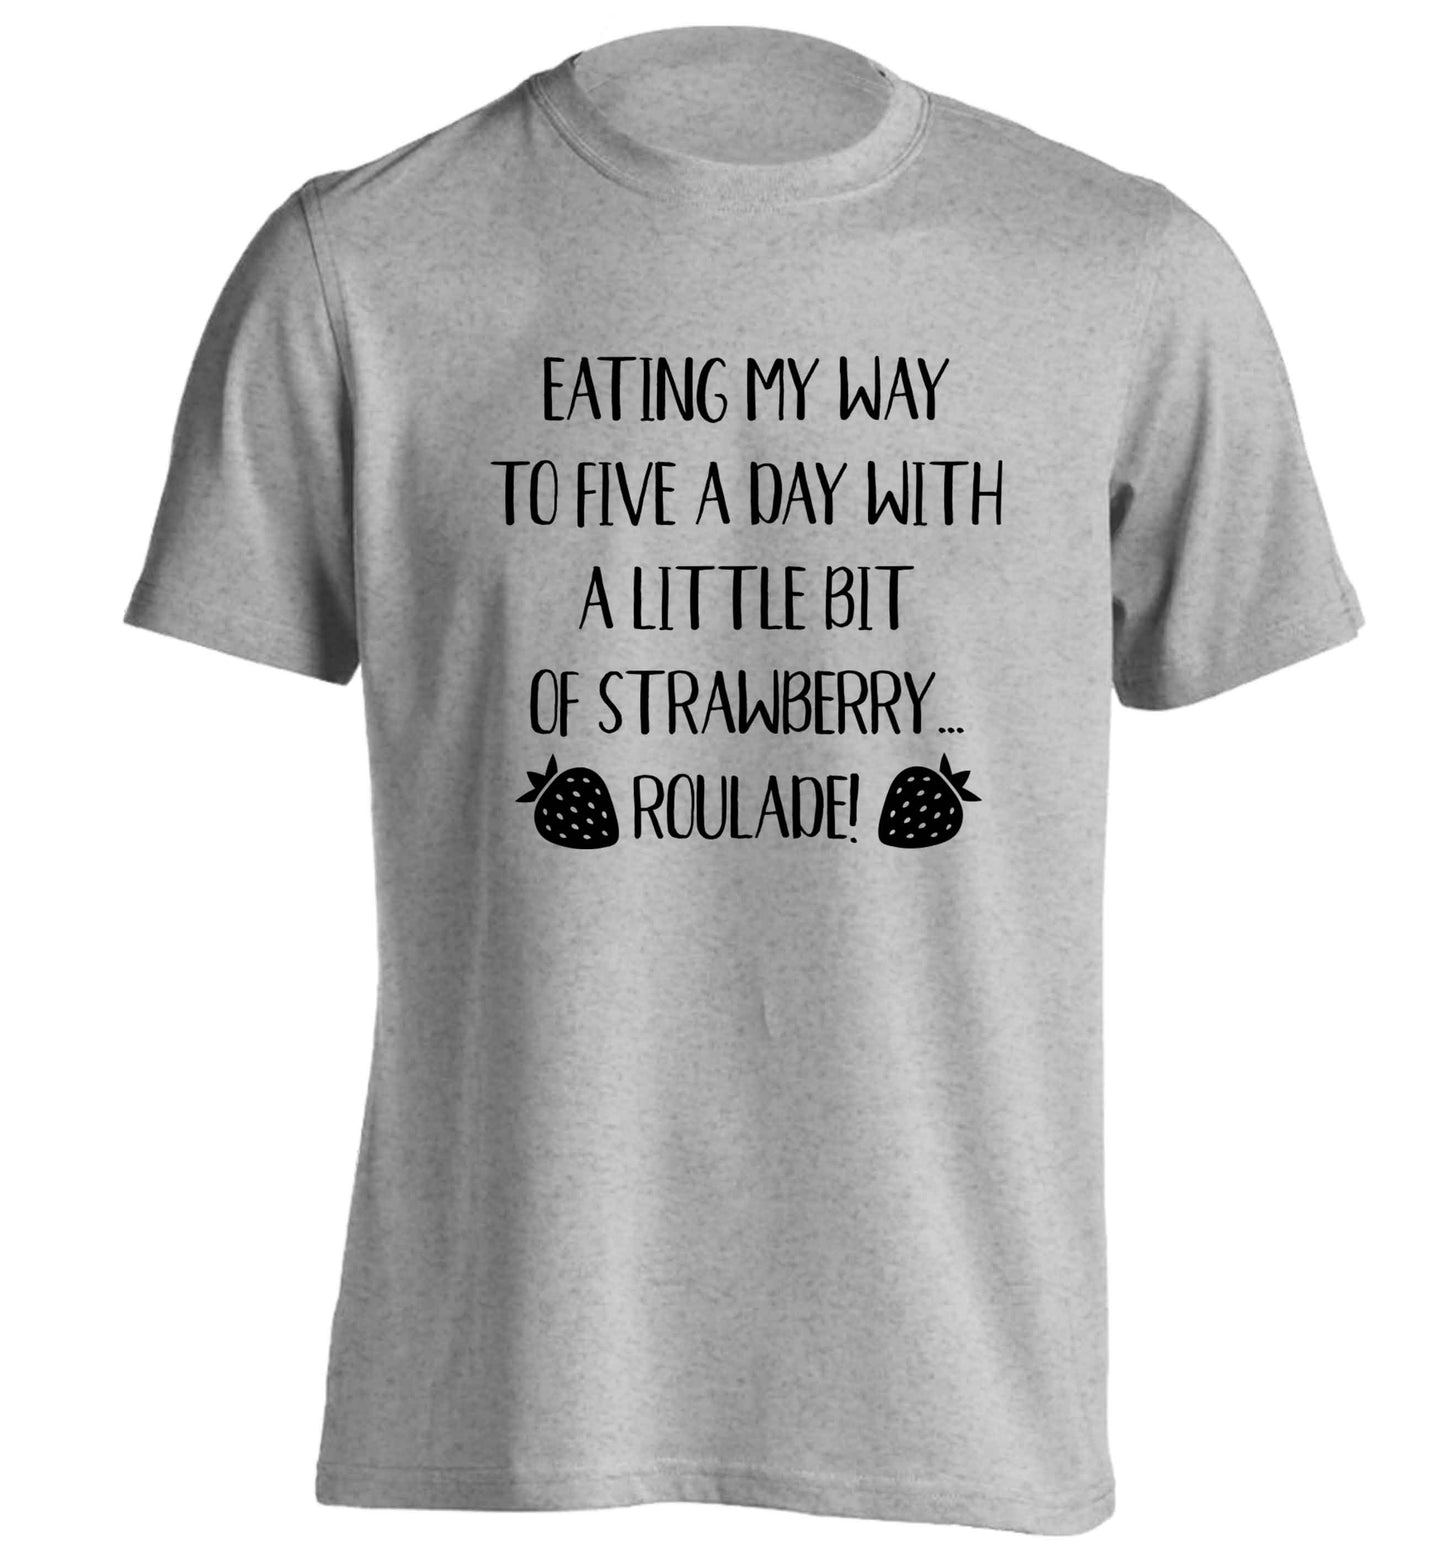 Eating my way to five a day with a little bit of strawberry roulade adults unisex grey Tshirt 2XL